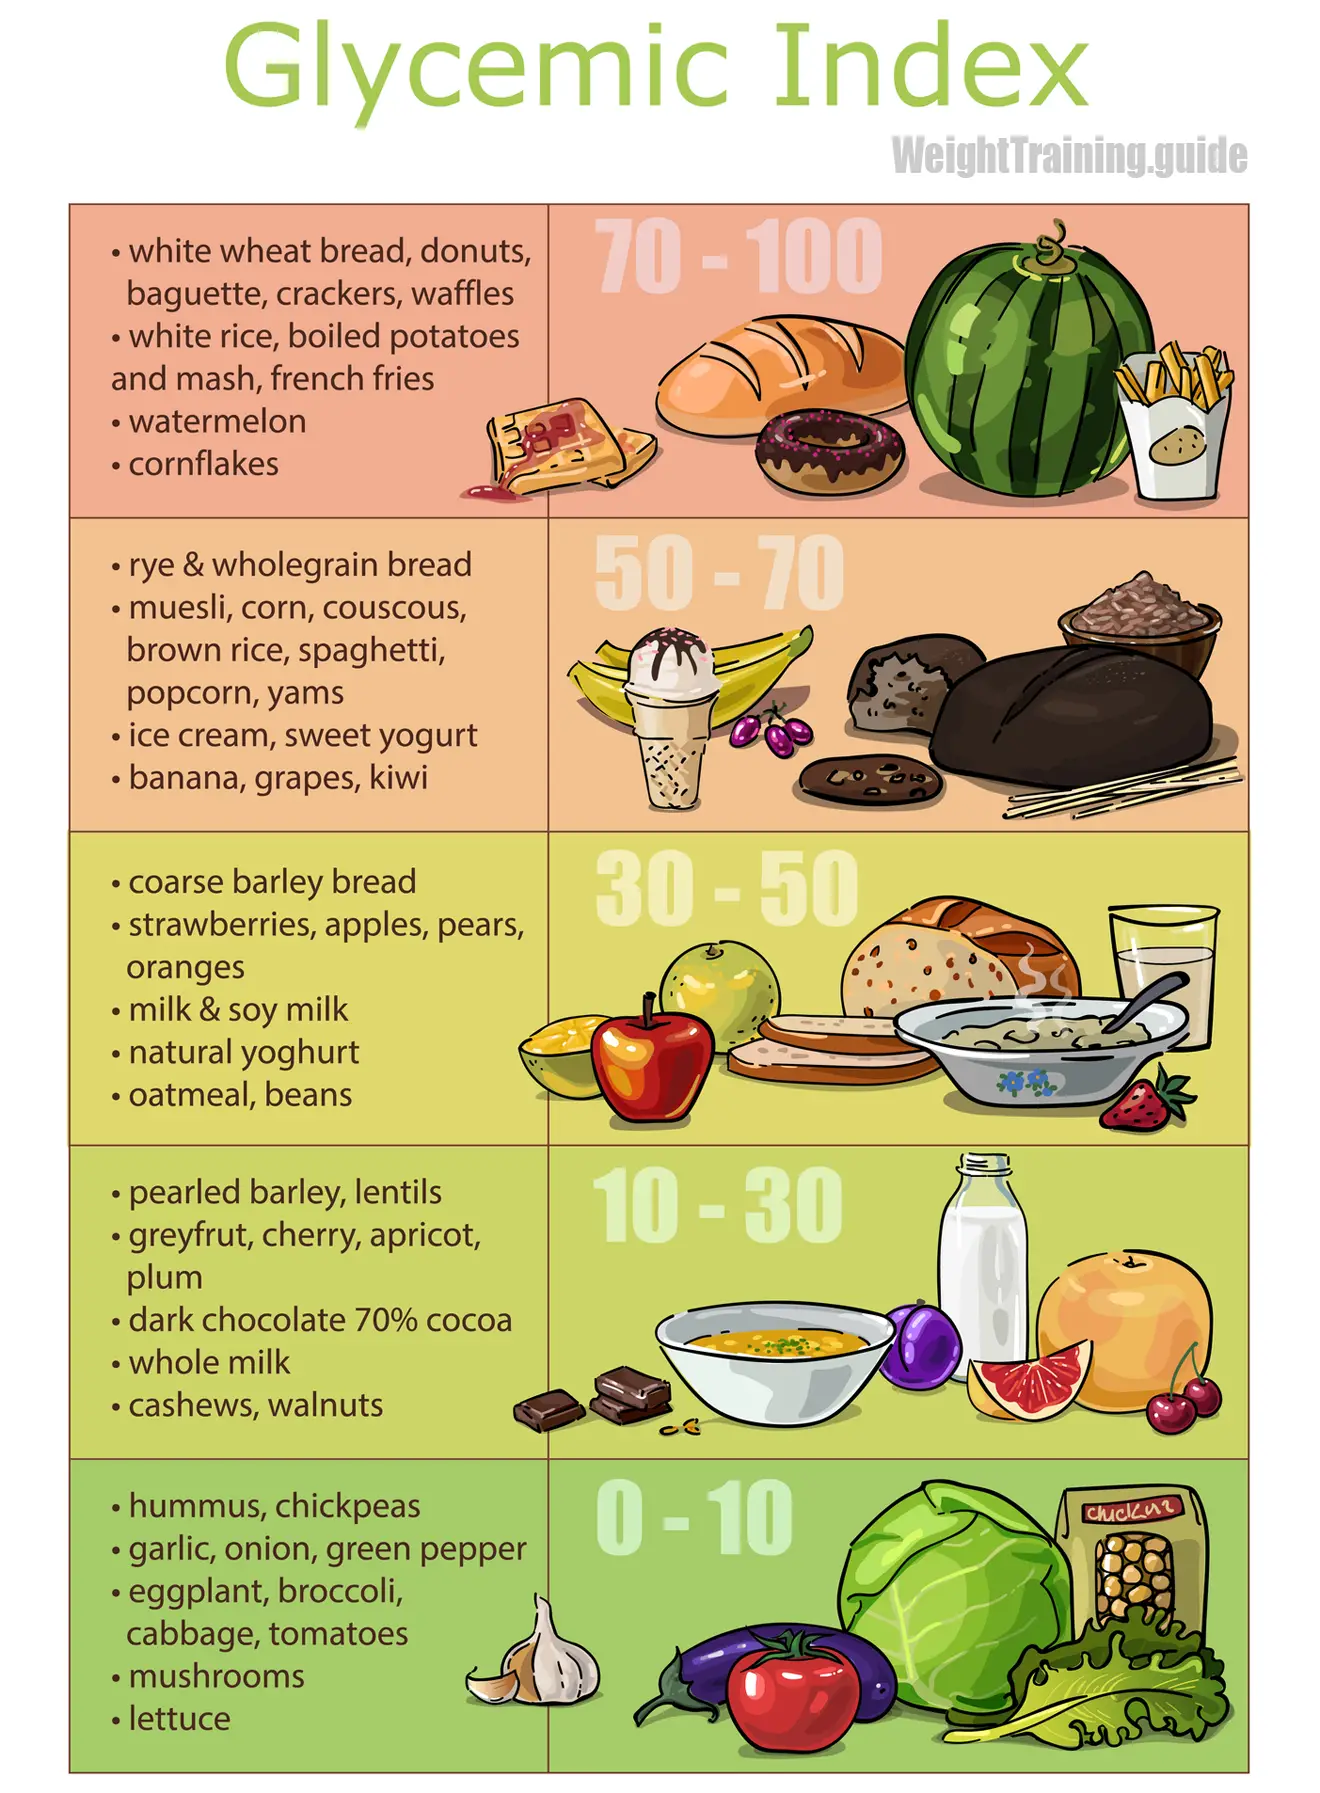 High, medium, and low glycemic index foods